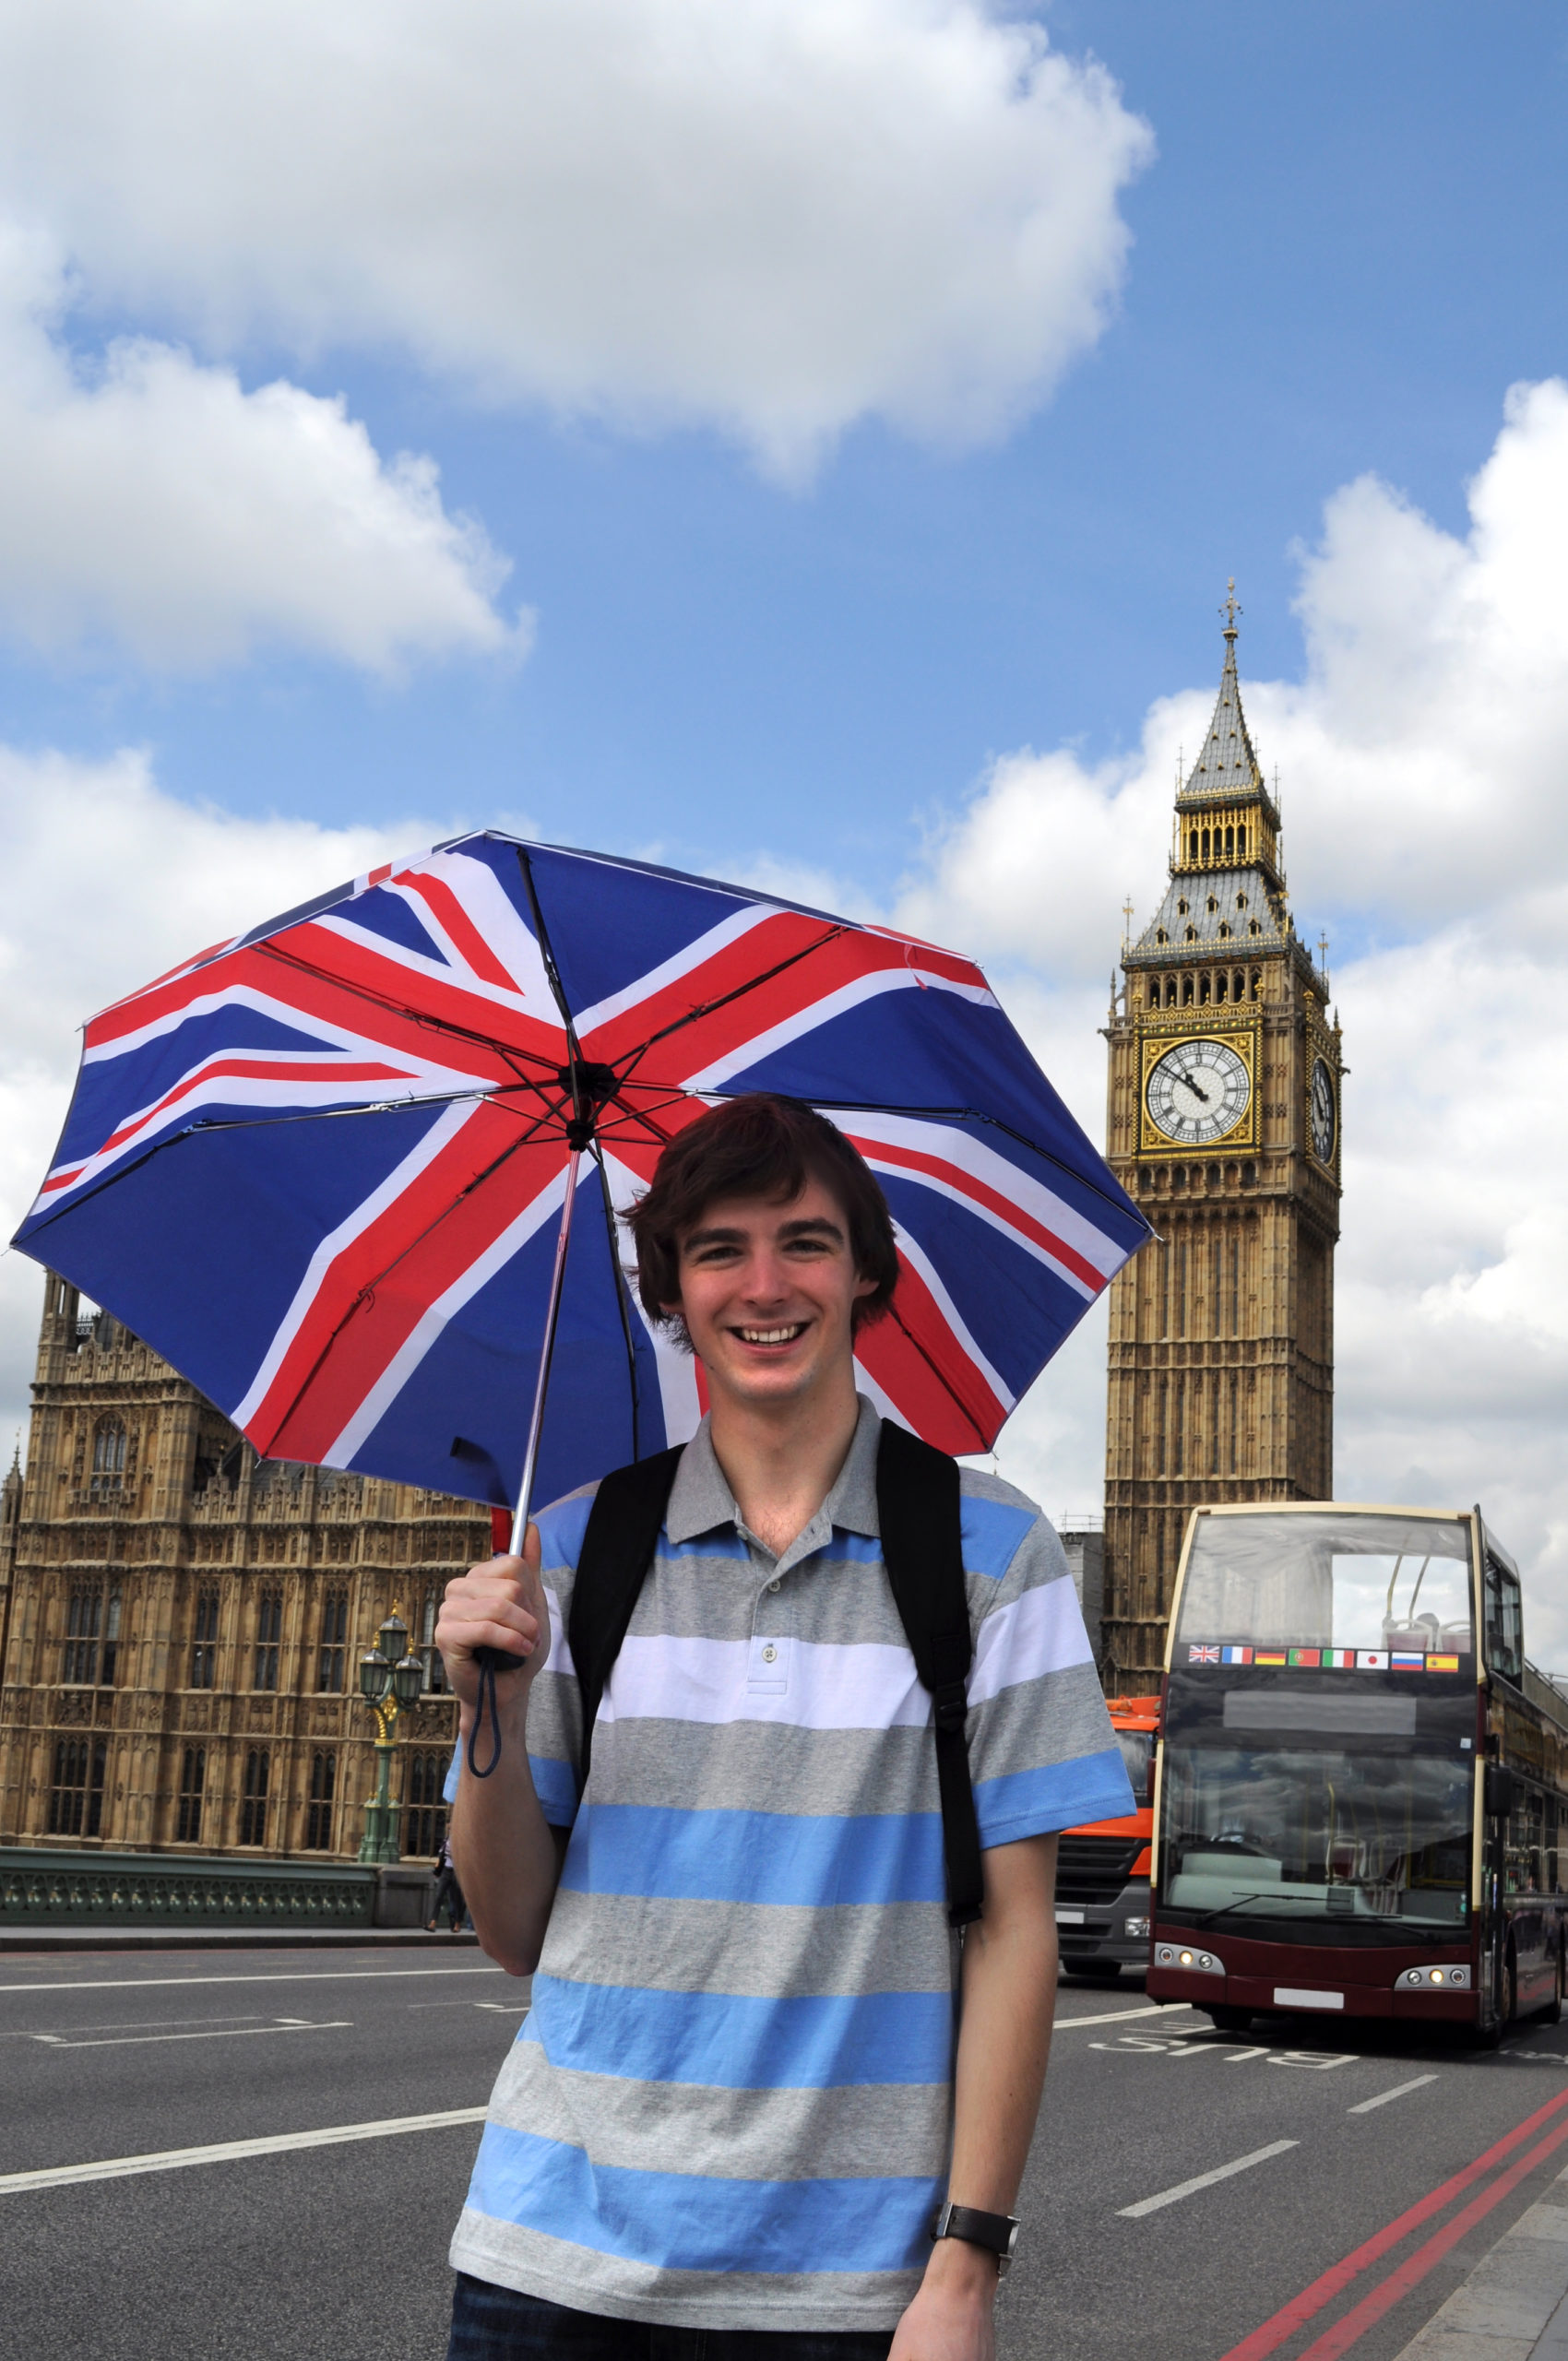 Big Ben and tourist with British flag umbrella at Westminster bridge in London